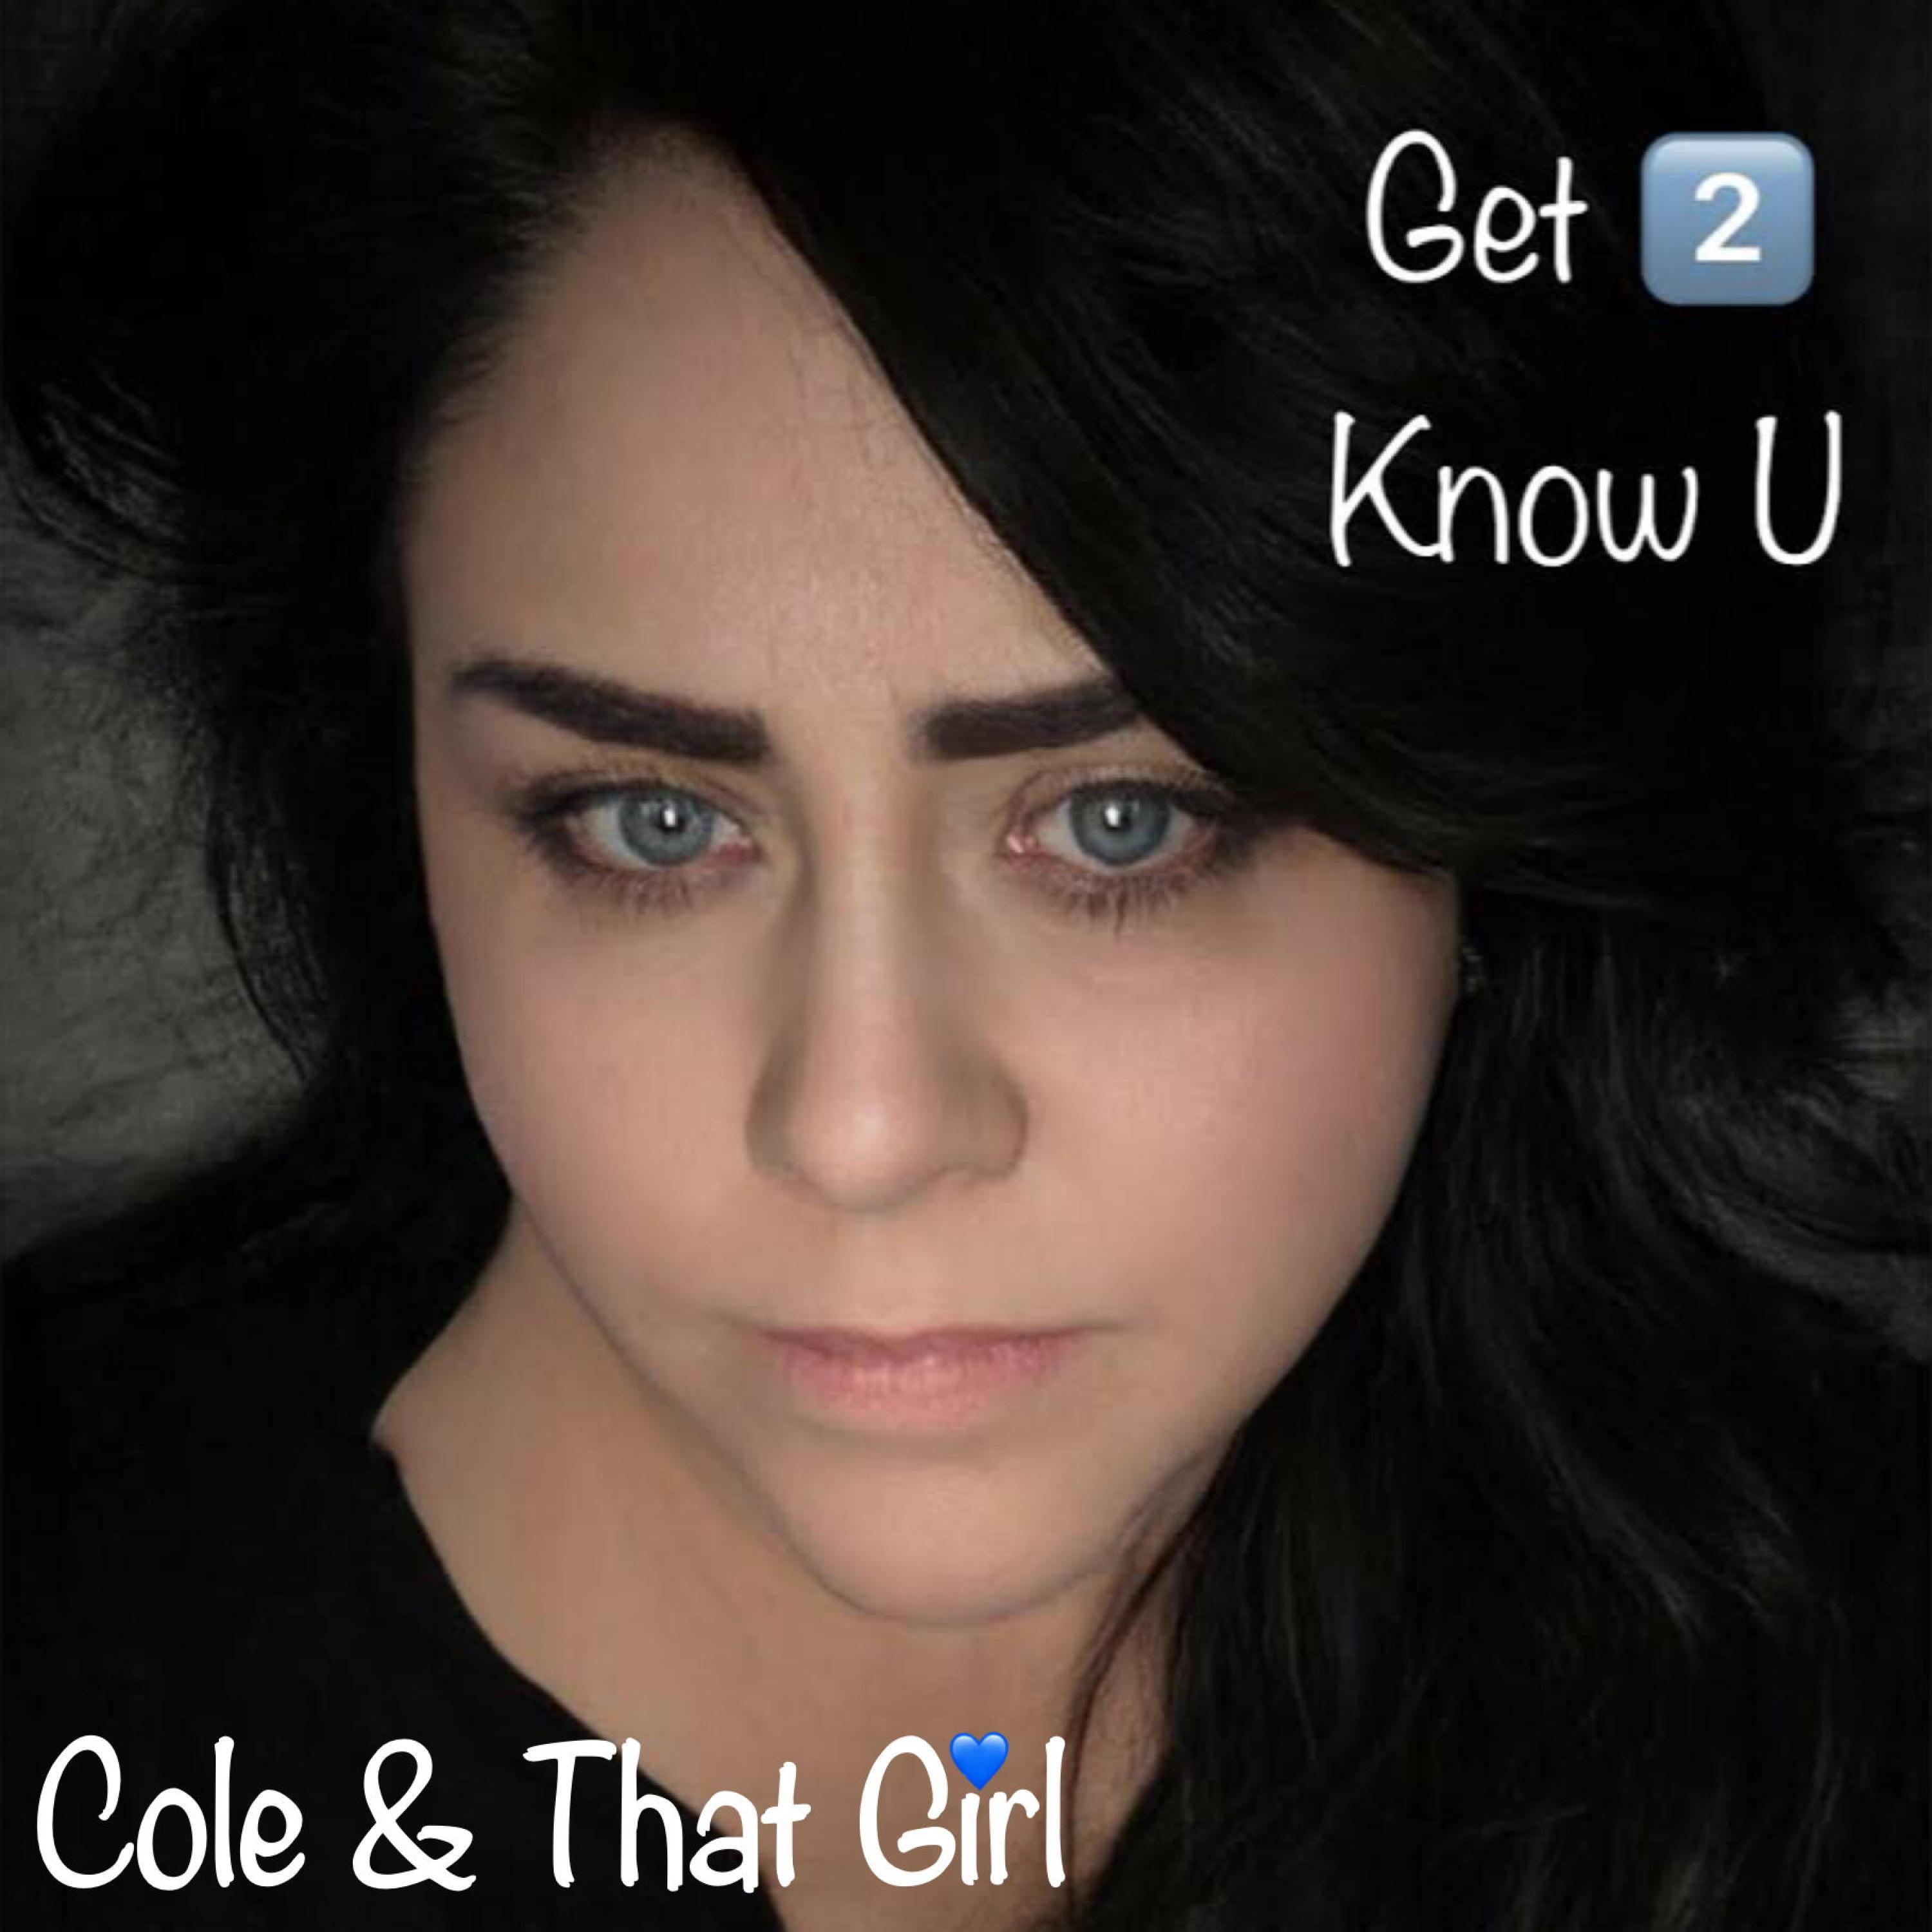 Cole & That Girl - Get 2 Know U